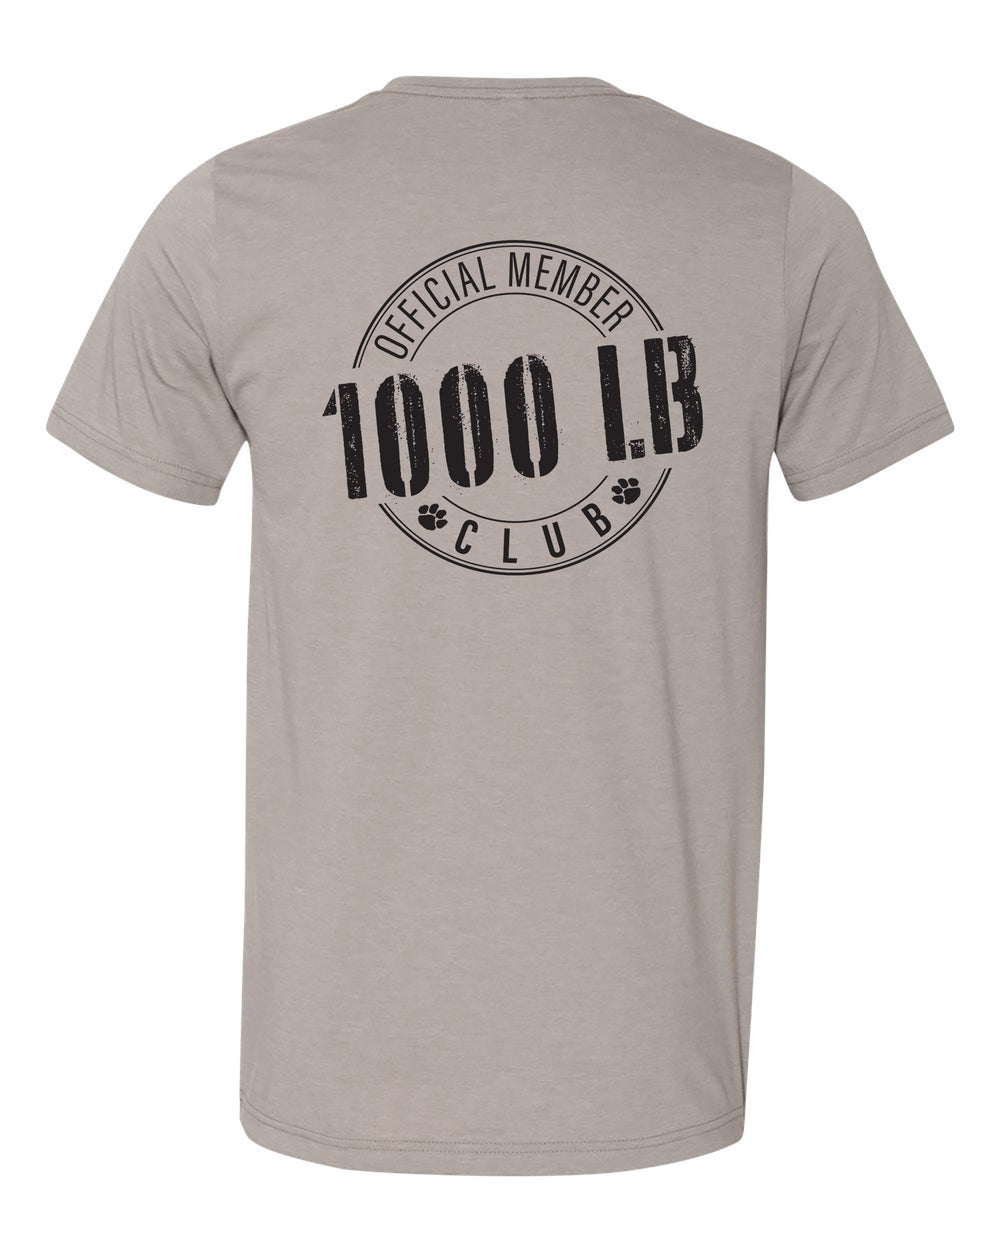 All Saints Cougars Lifting Club - Official Member - Select Weight Class - Youth and Adult Tee